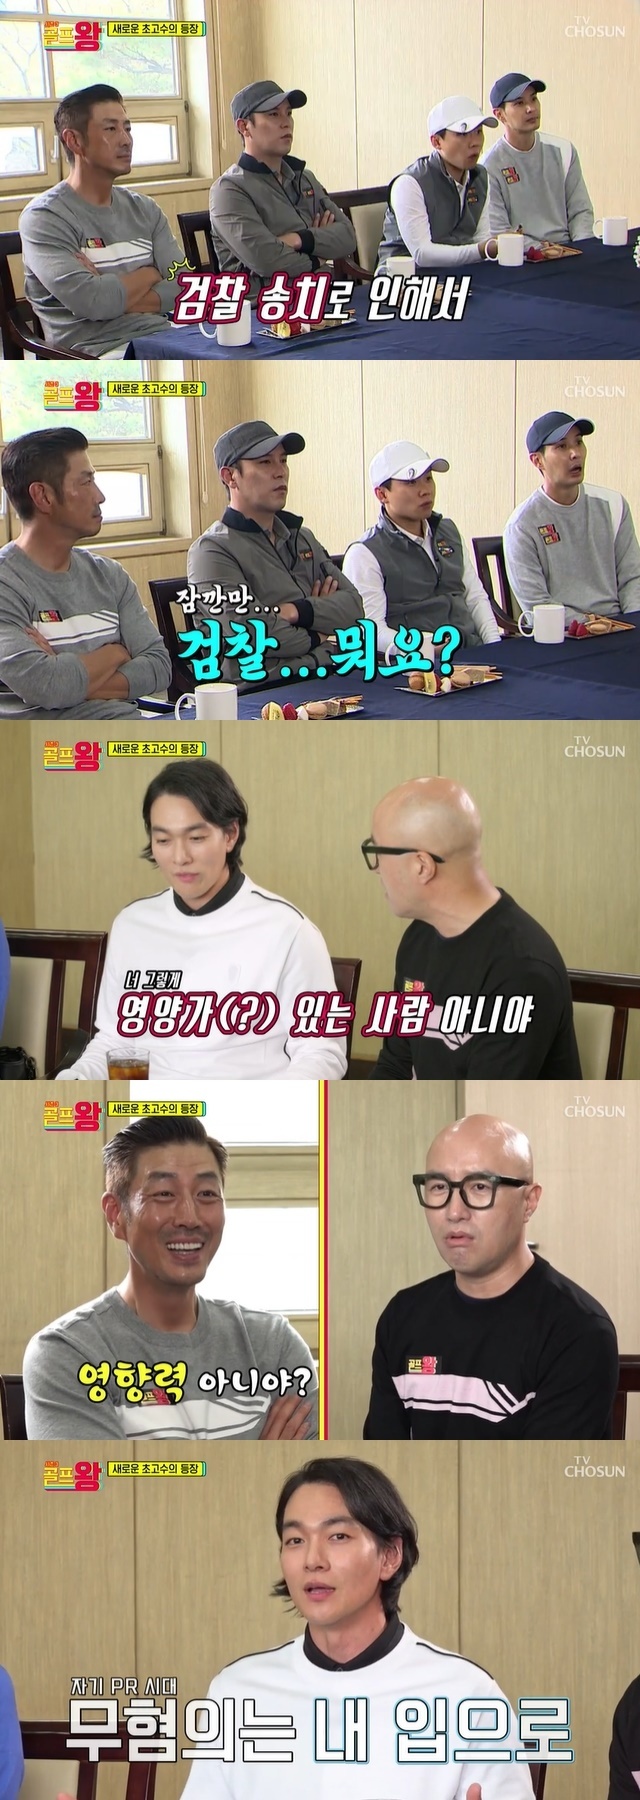 Kyu-han Lee referred himself to the past when he was sent Prosecution for alleged violence.In the 7th episode of TV Chosun entertainment Golf King 3 broadcasted on May 21, the members who left the battery training to Jeju Island confronted the actresses Hong Eun-hee, Oh Yoon-ah, Yang Jung-a and Yoon Hae-young.On this day, the Golf King team and the Golf Queen team conducted a pregame of treasure hunts to win the chance.Since then, the Golf King team has won no opponent team practice swing, m away, change the ball position, Jeju Island fruit box chance, and the Golf Queen team has won -1, relative team + 2 and m away chances.Jang Min-Ho and Yang Jung-aas past CF relationship was revealed while each teams desire to win was infested.My sister was a star at the time, and I was doing a middle school child model, and I went to a pleasant place because I had a snack advertisement, Jang Min-Ho recalled.Yang Jung-aa said, Was it a male-male model? Soon he recalled Jang Min-Ho at that time, and Jang Min-Ho said, I was so glad to see you.In the first four-to-four team game, a pre-game egg-laying game was also held with the Chances of Director Kim Mi-hyun. It was a game that pulled out a lot of balls with dance in 30 seconds with a box with a ball.Kim Kook-jin said, Ivy told me this: Oh Yoon-ah would have been a music industry if he made his debut as a dance singer.Oh Yoon-ah explained that he went to the academy like Ivy and that it was just an old story.However, Oh Yoon-ah showed a soft dance line with elongated limbs and Yang Se-hyeong commented that it was rainy.On the day, Kim Mi-hyuns chance went to the Golf Queen team with Oh Yoon-ah, but after several battles, the Golf King team won the final.The next Battle followed.The Battle opponents were actors Park Sun-young, Seo Young-hee, Kyu-han Lee, and Hong Seok-cheon.Park Sun-young was a tremendous player at Rabe 4-under in the 22-year-old, and Seo Young-hee was a year-long beginner with the goal of breaking the Rabe bag.Kyu-han Lee boasted a Rabe 87 in his third year of the season.Kyu-han Lee confessed, In fact, I promised to appear in Season 2 before Season 3, and I was unable to shoot because of the unexpected Prosecution transfer.I came out because I said I would appear unconditionally this time, he continued.Yang Se-hyeong, who heard Kyu-han Lee, responded, I did not even know it happened, and Hong Seok-cheon said, Why did you tell me... I did not know everything.You are not so nutritious. Yoon Tae-young, who was next to me in a confused situation, laughed at the appearance of correcting the nutritious with influence .Meanwhile, Kyu-han Lee was caught up in a driver and a manoeuvre while traveling in a car with a party in a drunken state near Gangnam District in Seoul in August 2020.At the time, the driver requested a formal Susa from the Gangnam District Police Station, claiming he had been violenced by Kyu-han Lee.Police sent the case to Prosecution on November 2 last year, and Kyu-han Lee denied all charges during the Susa process.Kyu-han Lee got off the JTBC drama Green Mothers Club and SBS drama Again My Life, which were scheduled to appear in the case, and appealed for panic disorder.